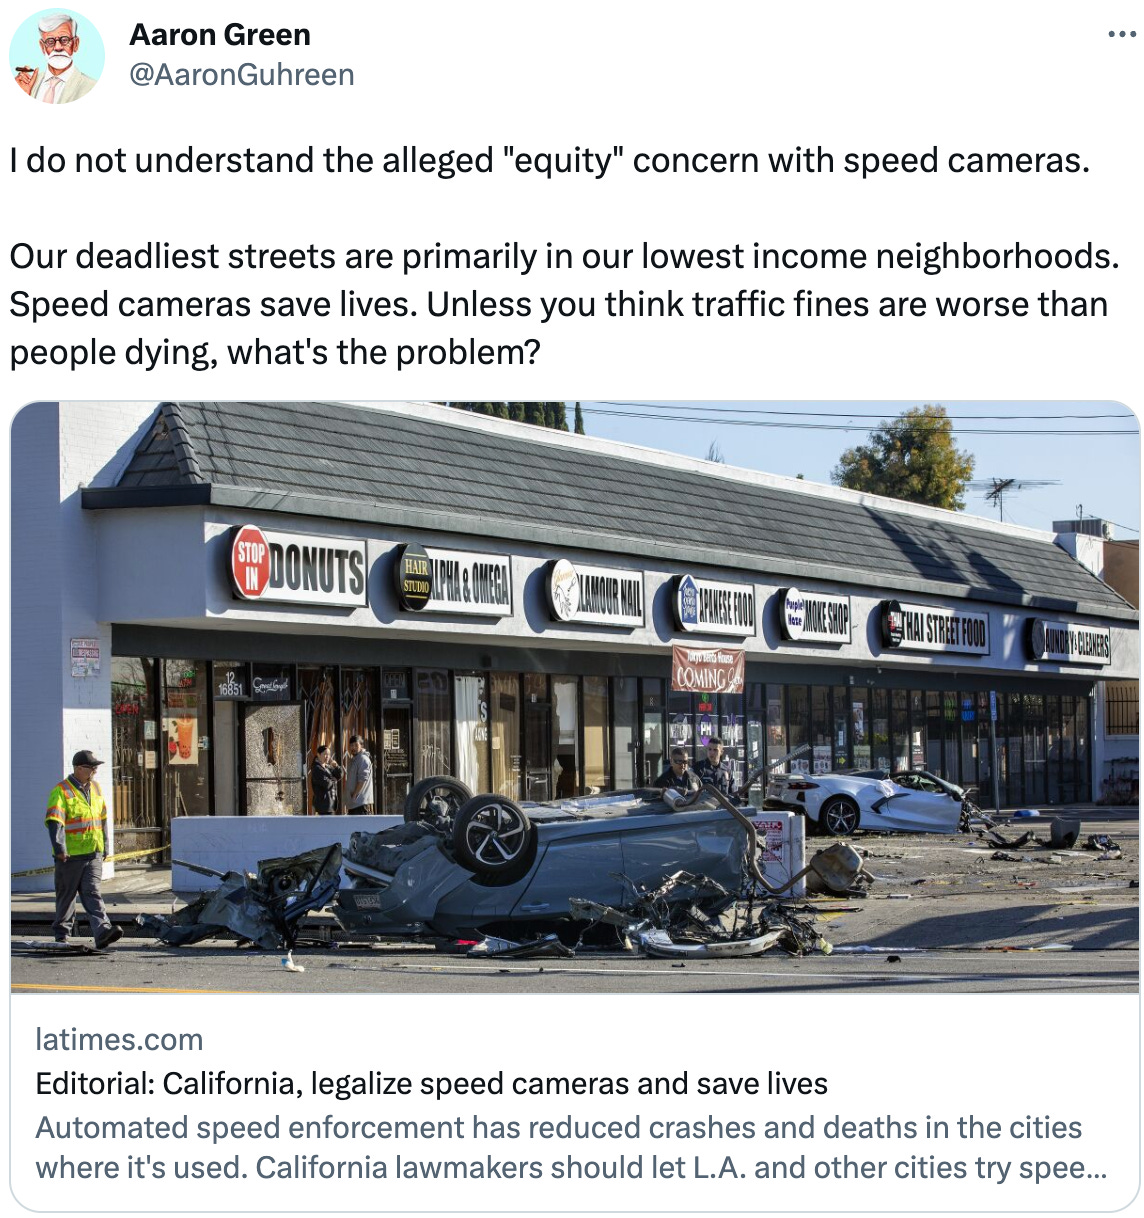  See new Tweets Conversation Aaron Green @AaronGuhreen I do not understand the alleged "equity" concern with speed cameras.   Our deadliest streets are primarily in our lowest income neighborhoods. Speed cameras save lives. Unless you think traffic fines are worse than people dying, what's the problem? latimes.com Editorial: California, legalize speed cameras and save lives Automated speed enforcement has reduced crashes and deaths in the cities where it's used. California lawmakers should let L.A. and other cities try speed cameras on the most dangerous streets.